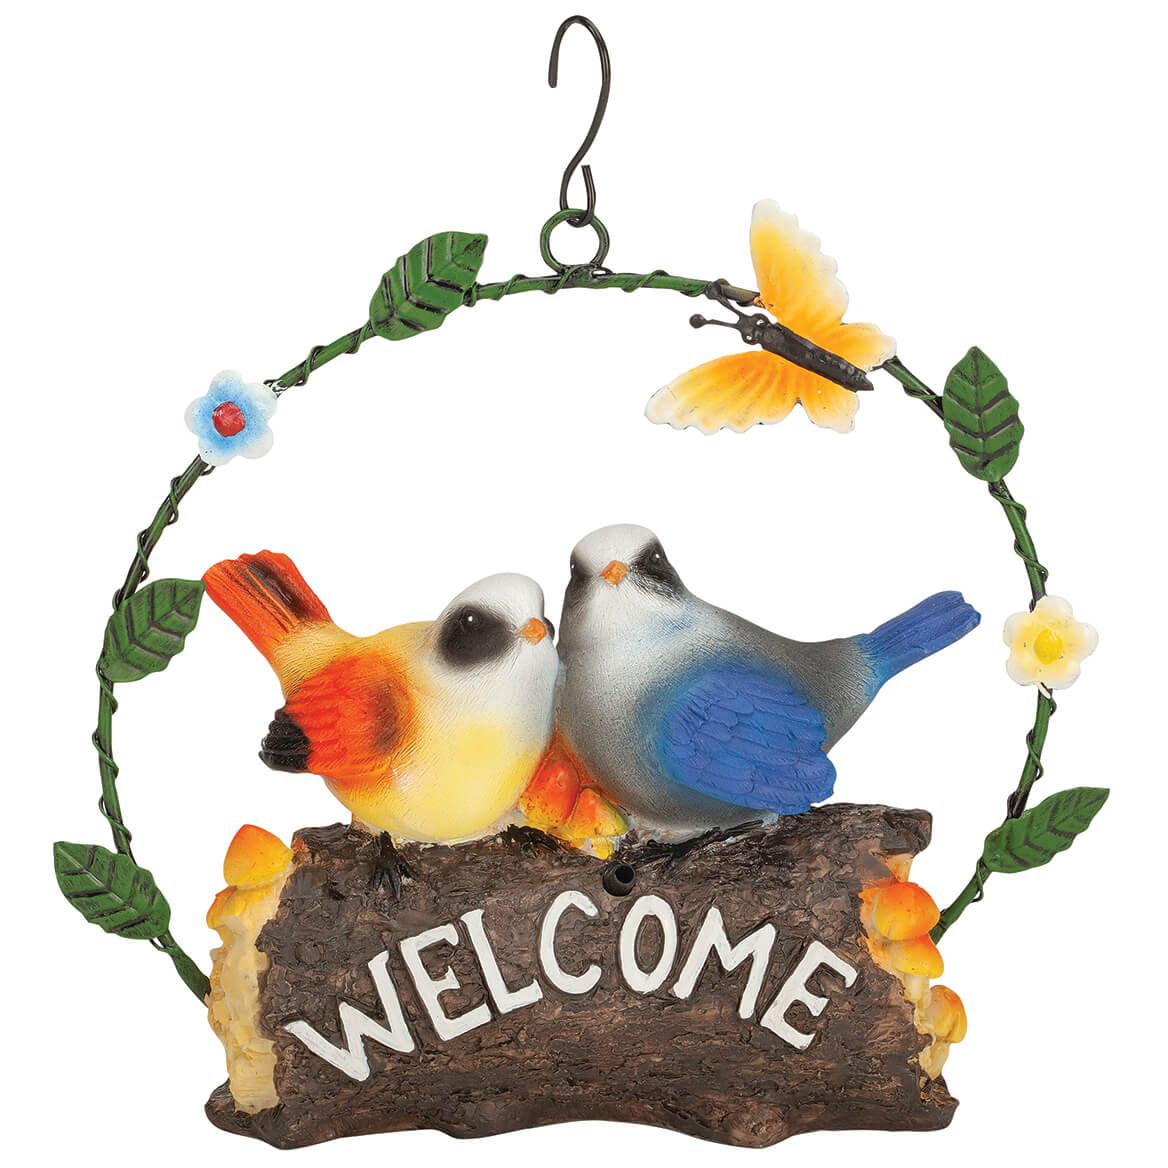 Motion Sensor Birds Welcome Hanging by Fox River™ Creations + '-' + 377076